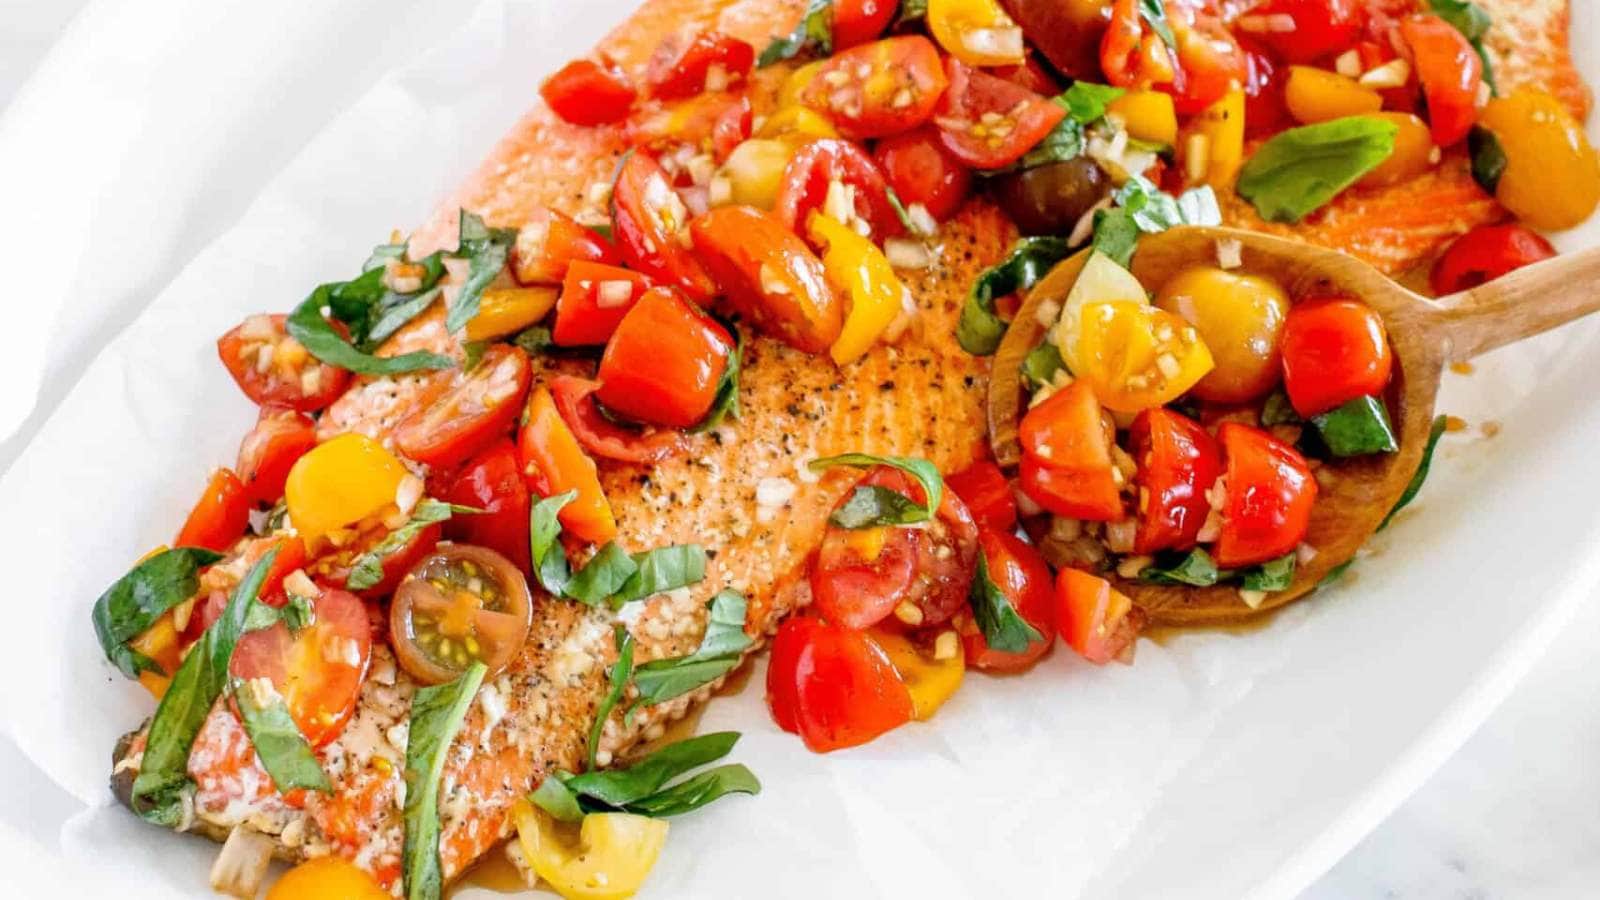 Baked Bruschetta Salmon recipe by Busy Day Dinners.